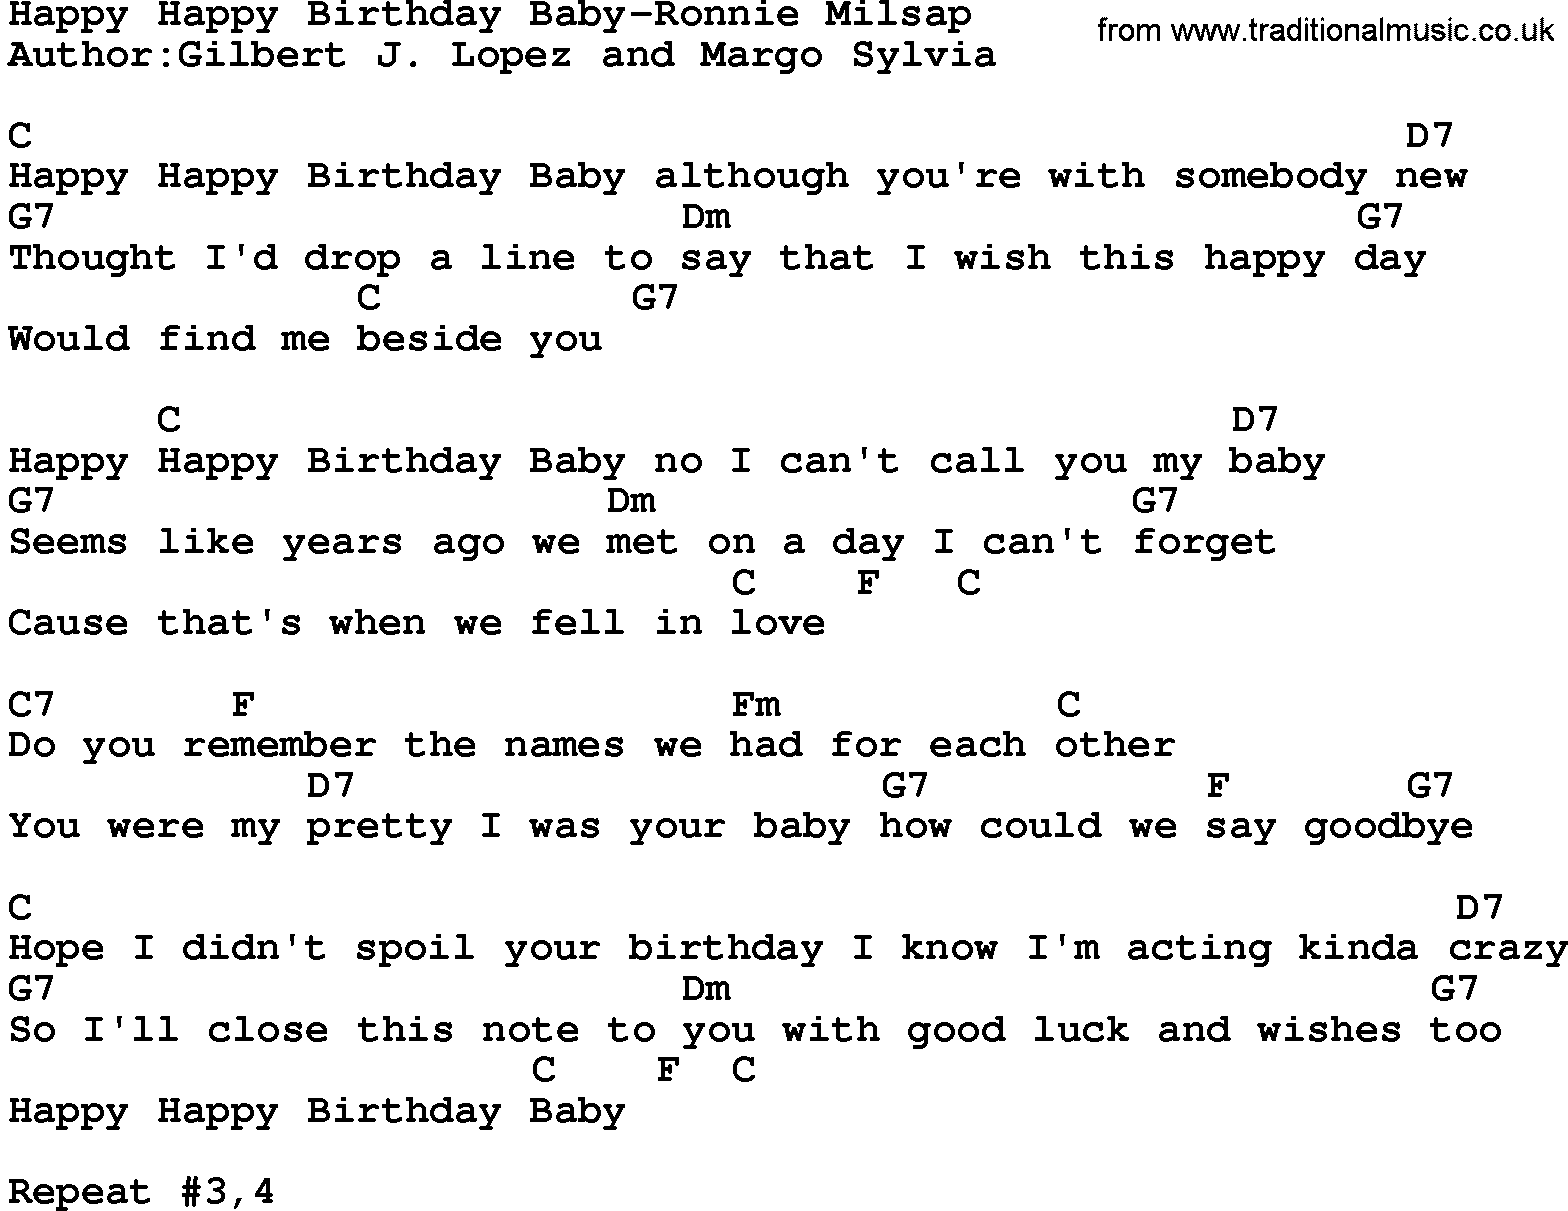 Country music song: Happy Happy Birthday Baby-Ronnie Milsap lyrics and chords